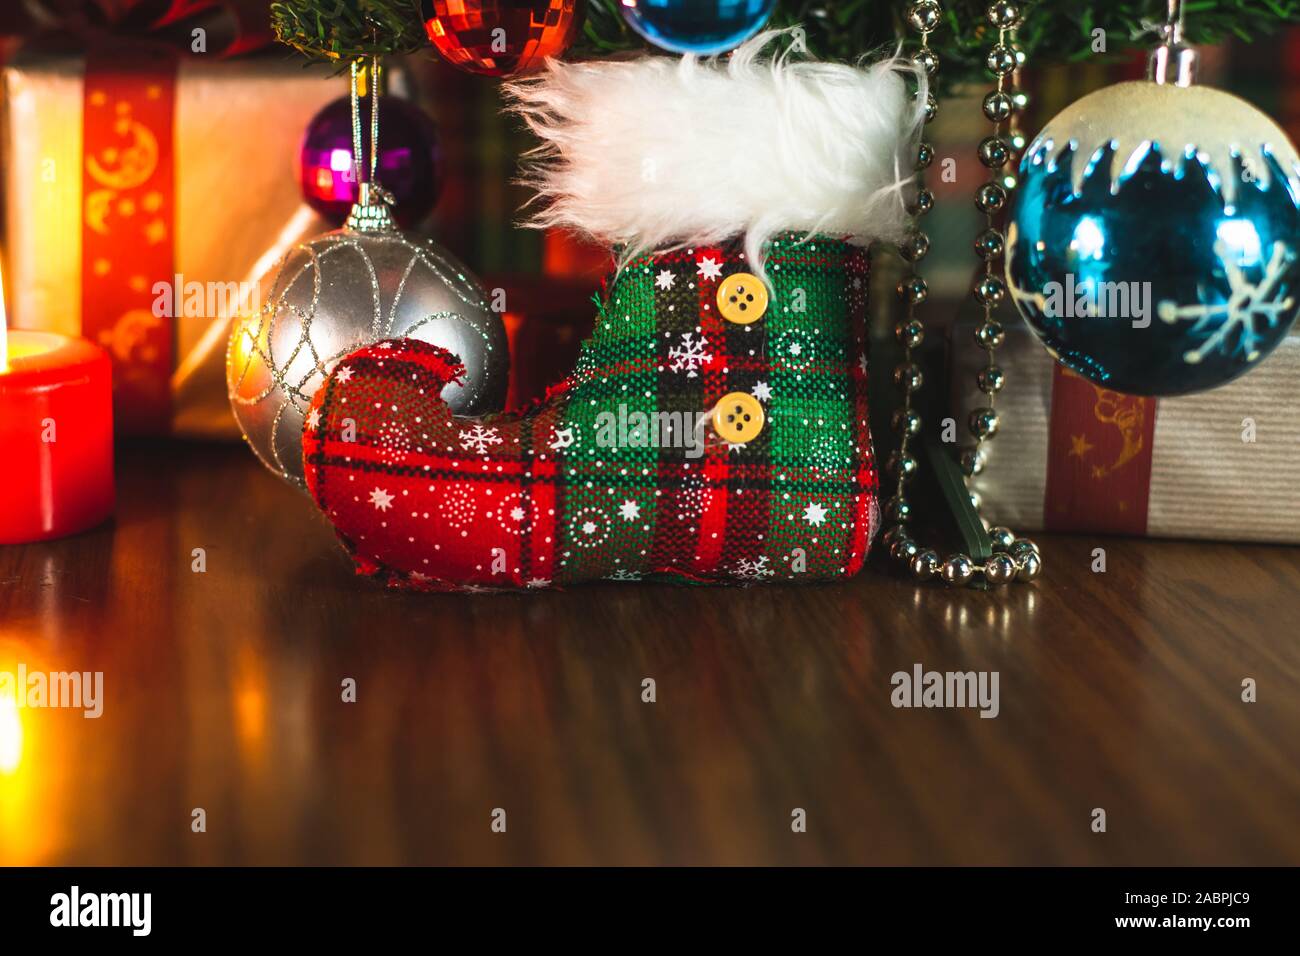 Christmas decorations and ornaments under a Christmas tree around the holidays. Festive celebration. Stock Photo